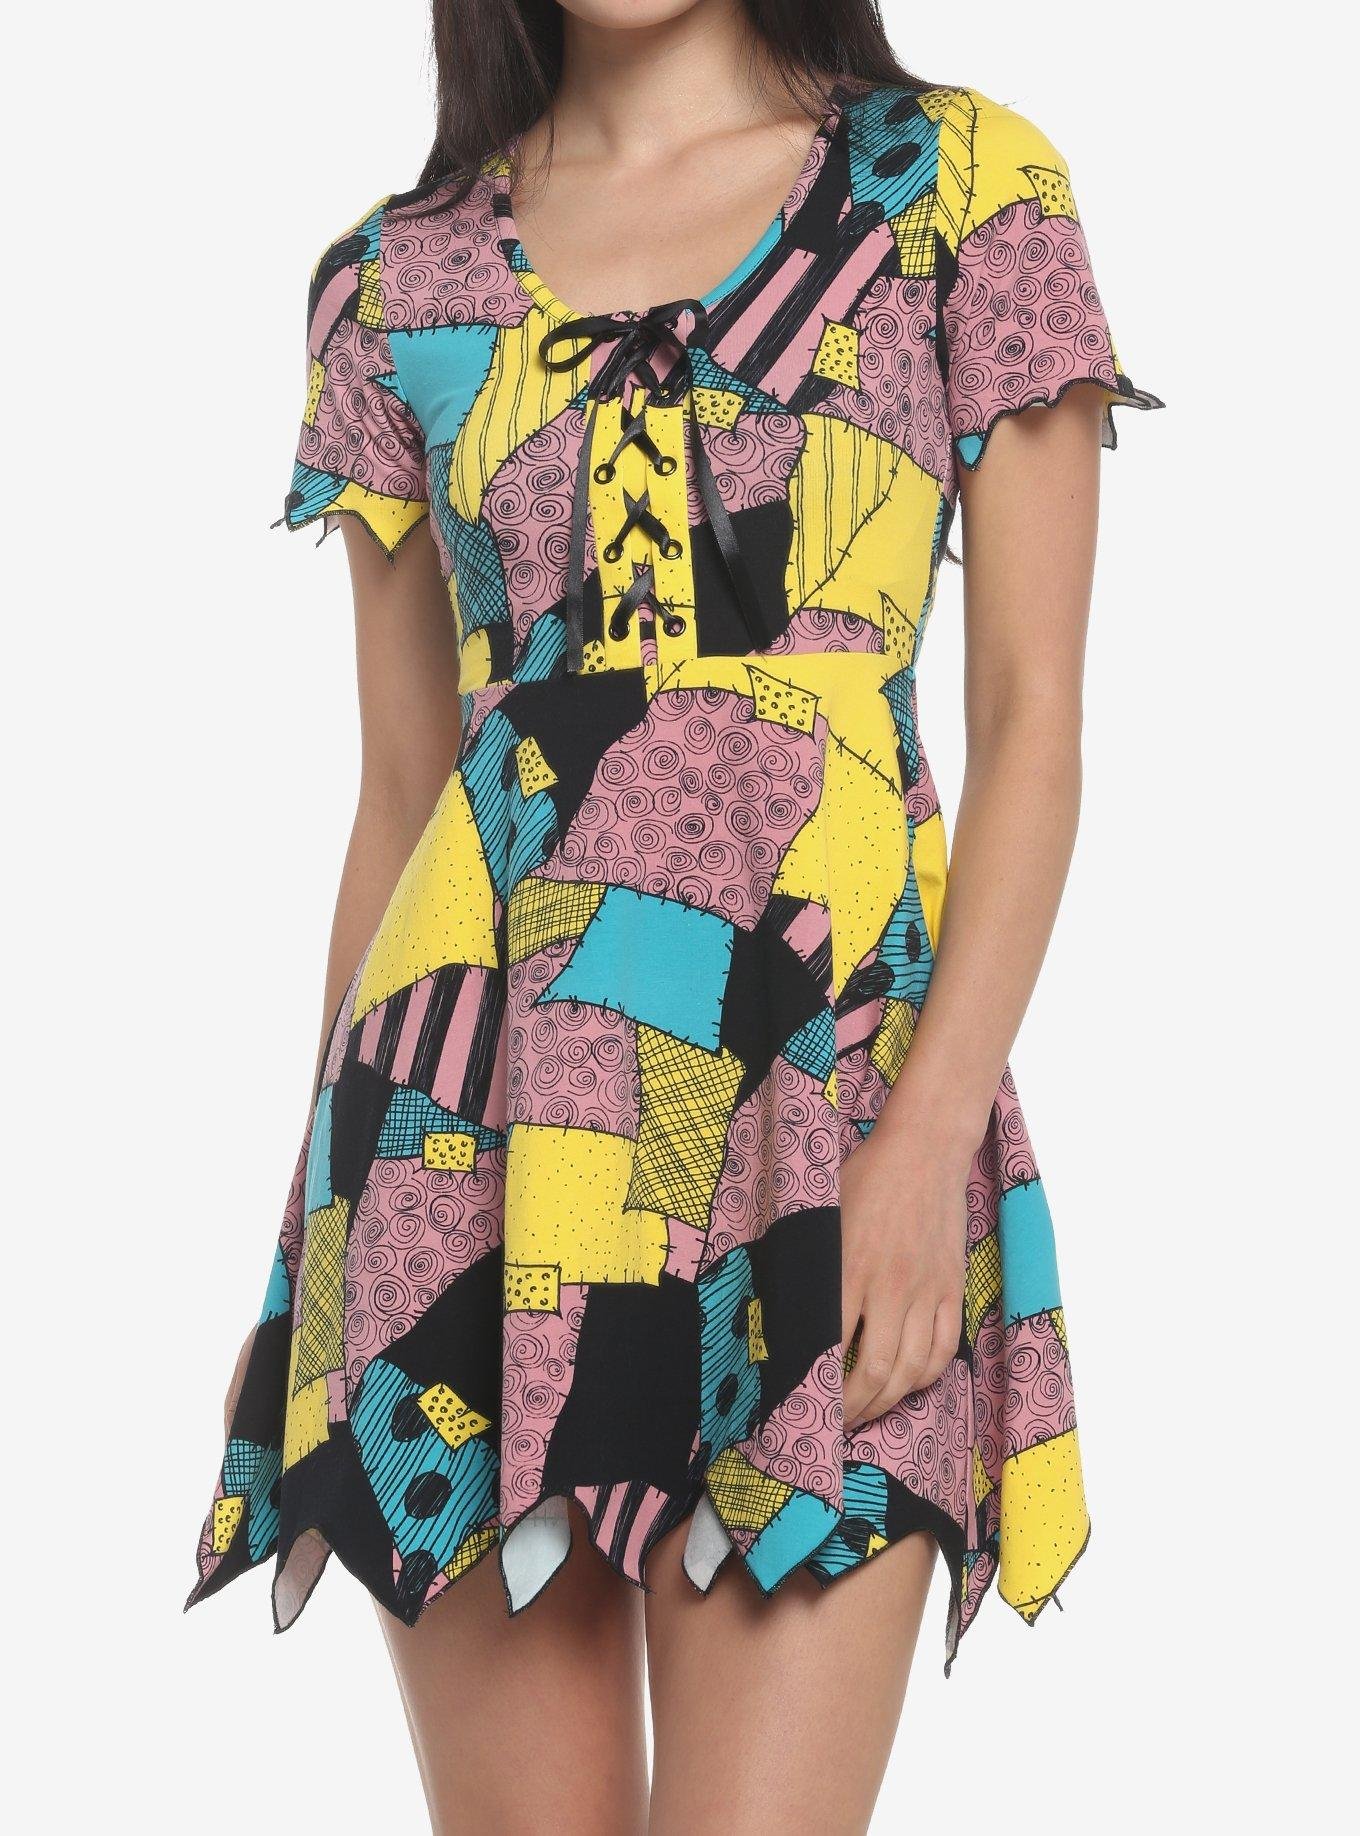 THE NIGHTMARE BEFORE CHRISTMAS SALLY PATCHWORK JAGGED DRESS